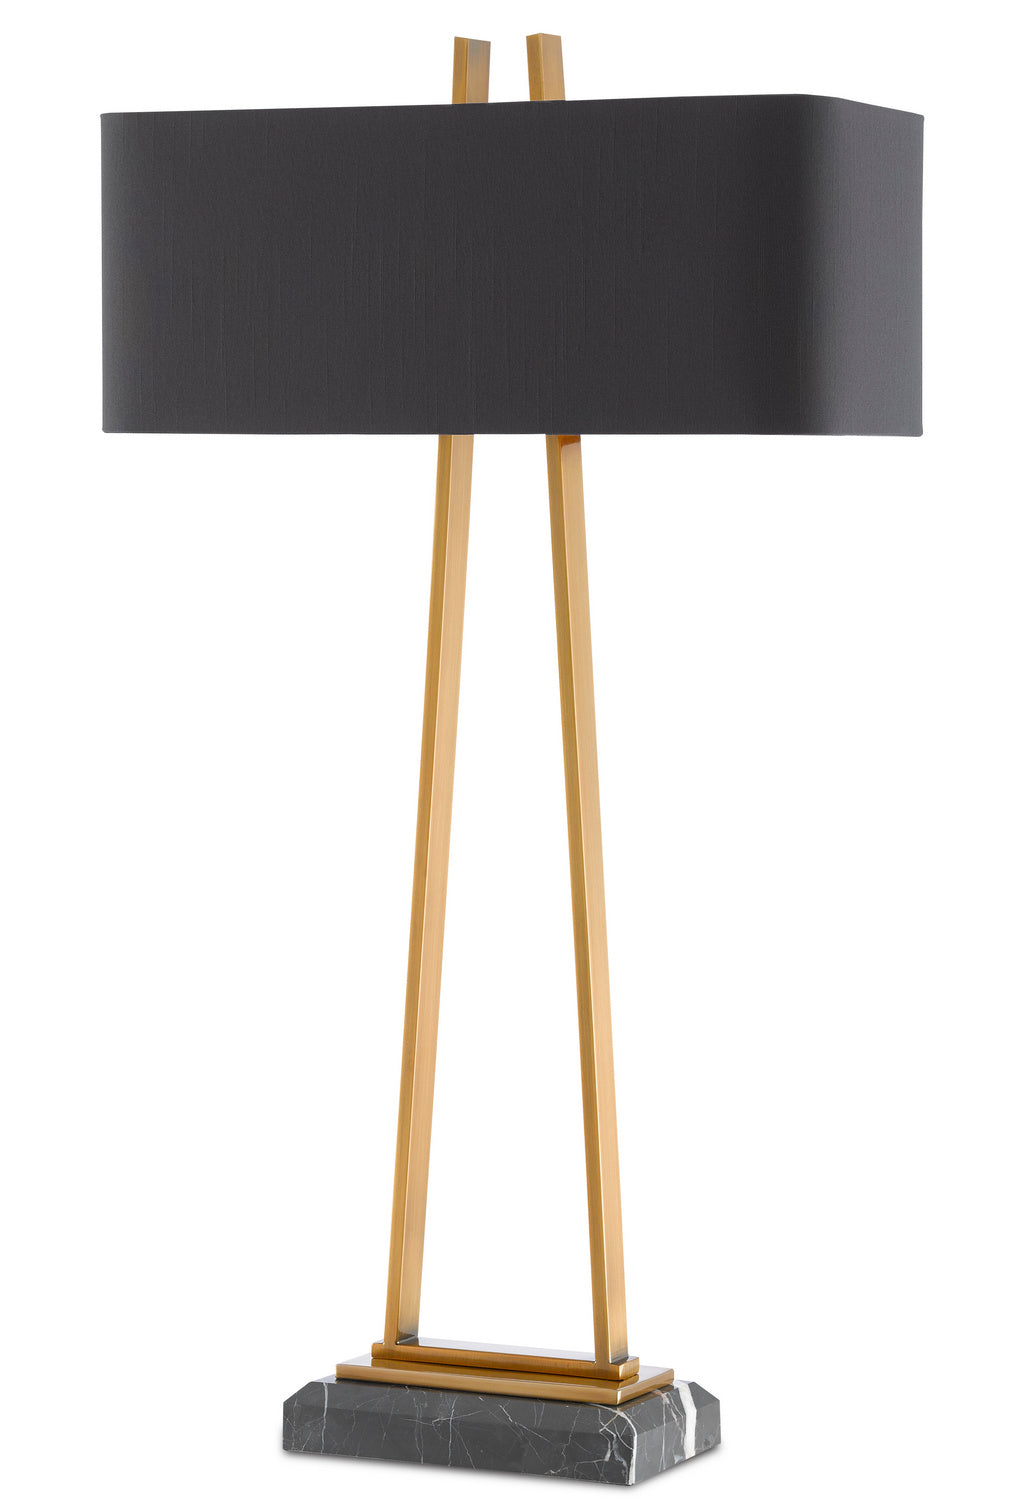 Two Light Table Lamp from the Adorn collection in Antique Brass/Black finish